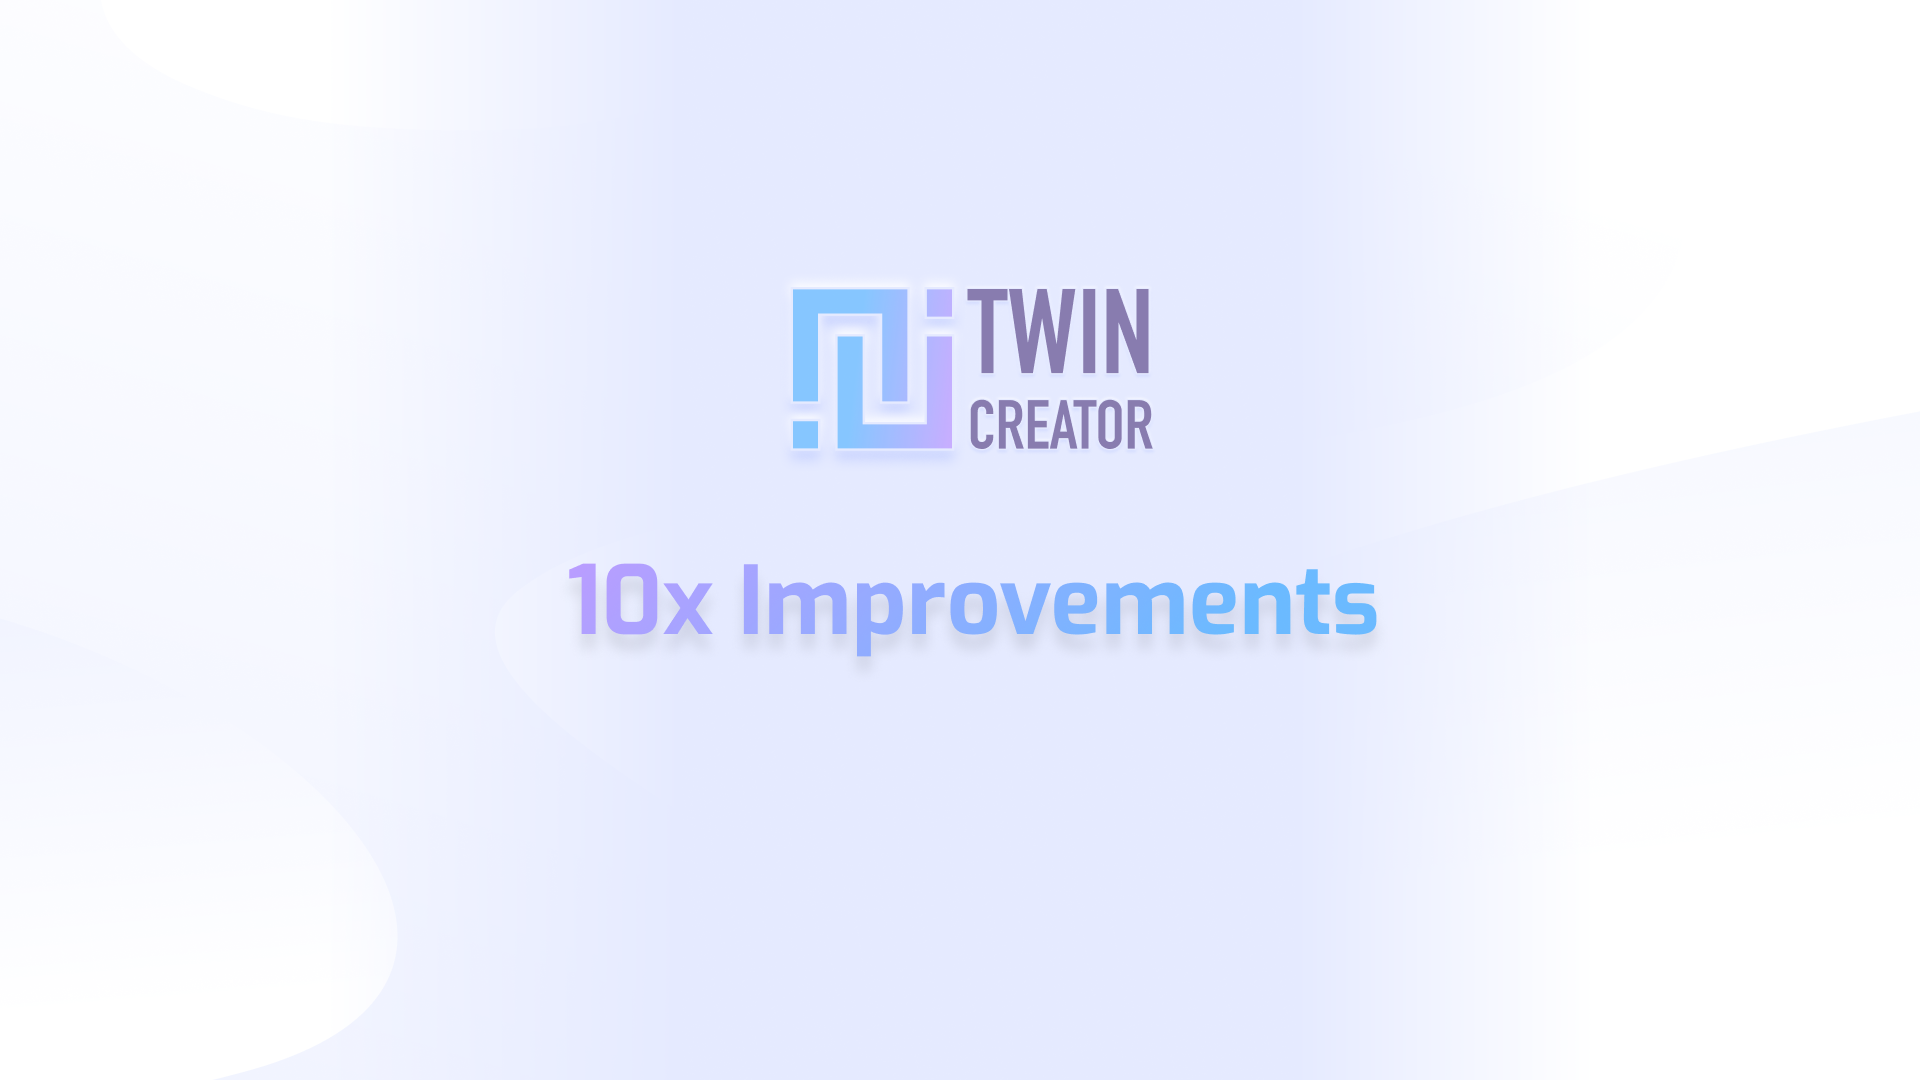 TwinCreator is now 10 times easier to use, 10 times more effective